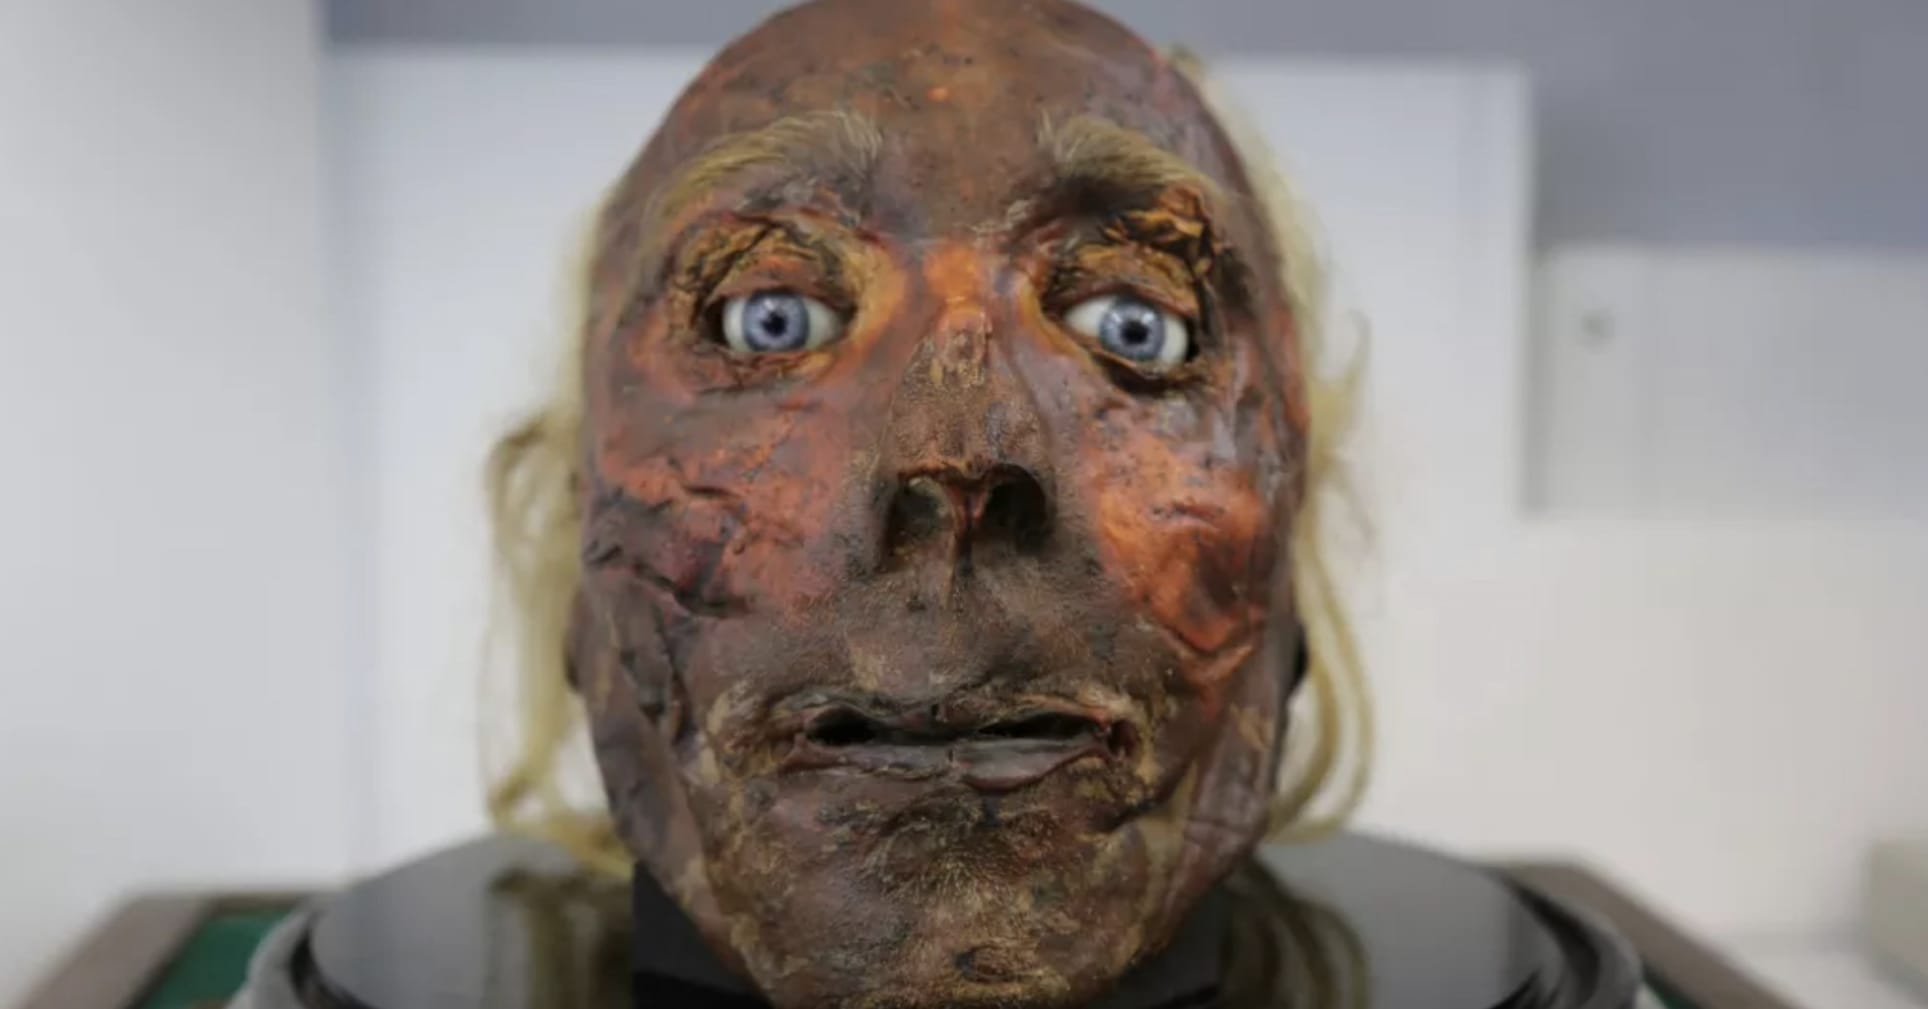 Jeremy Bentham's Body Has Had One Of The Strangest Afterlives In History